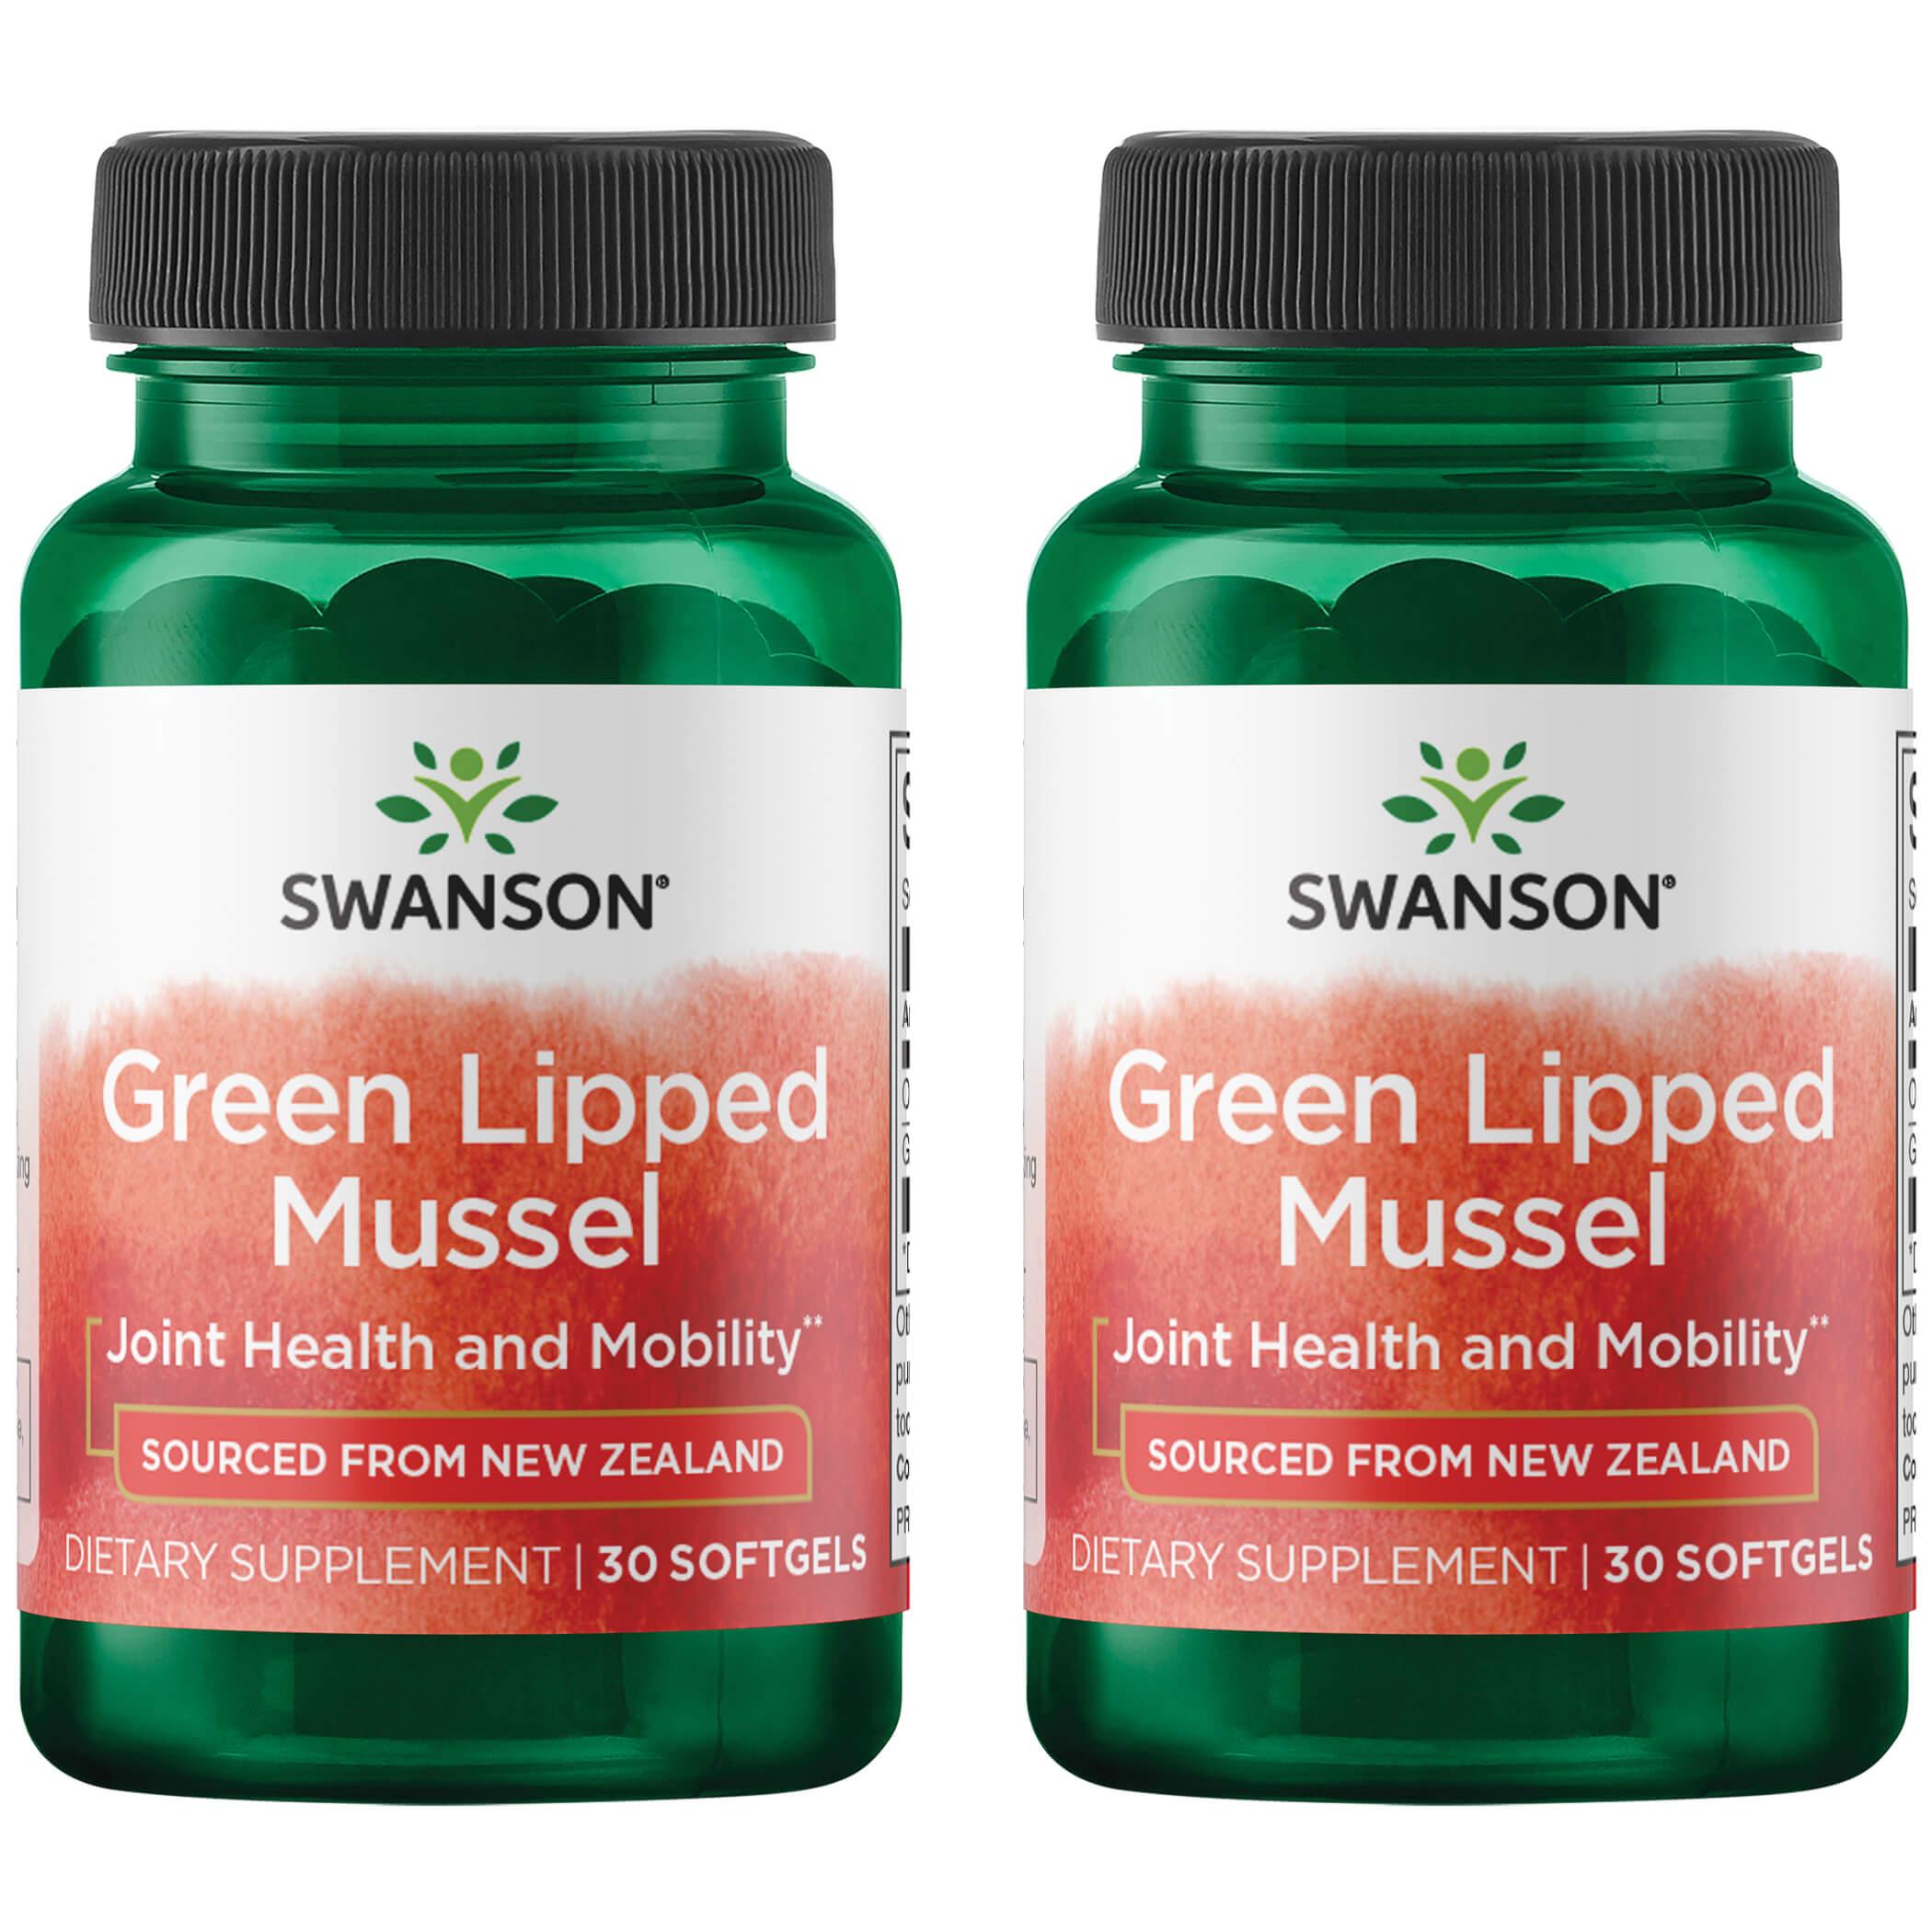 Swanson EFAs Green Lipped Mussel 2 Pack Vitamin 30 Soft Gels